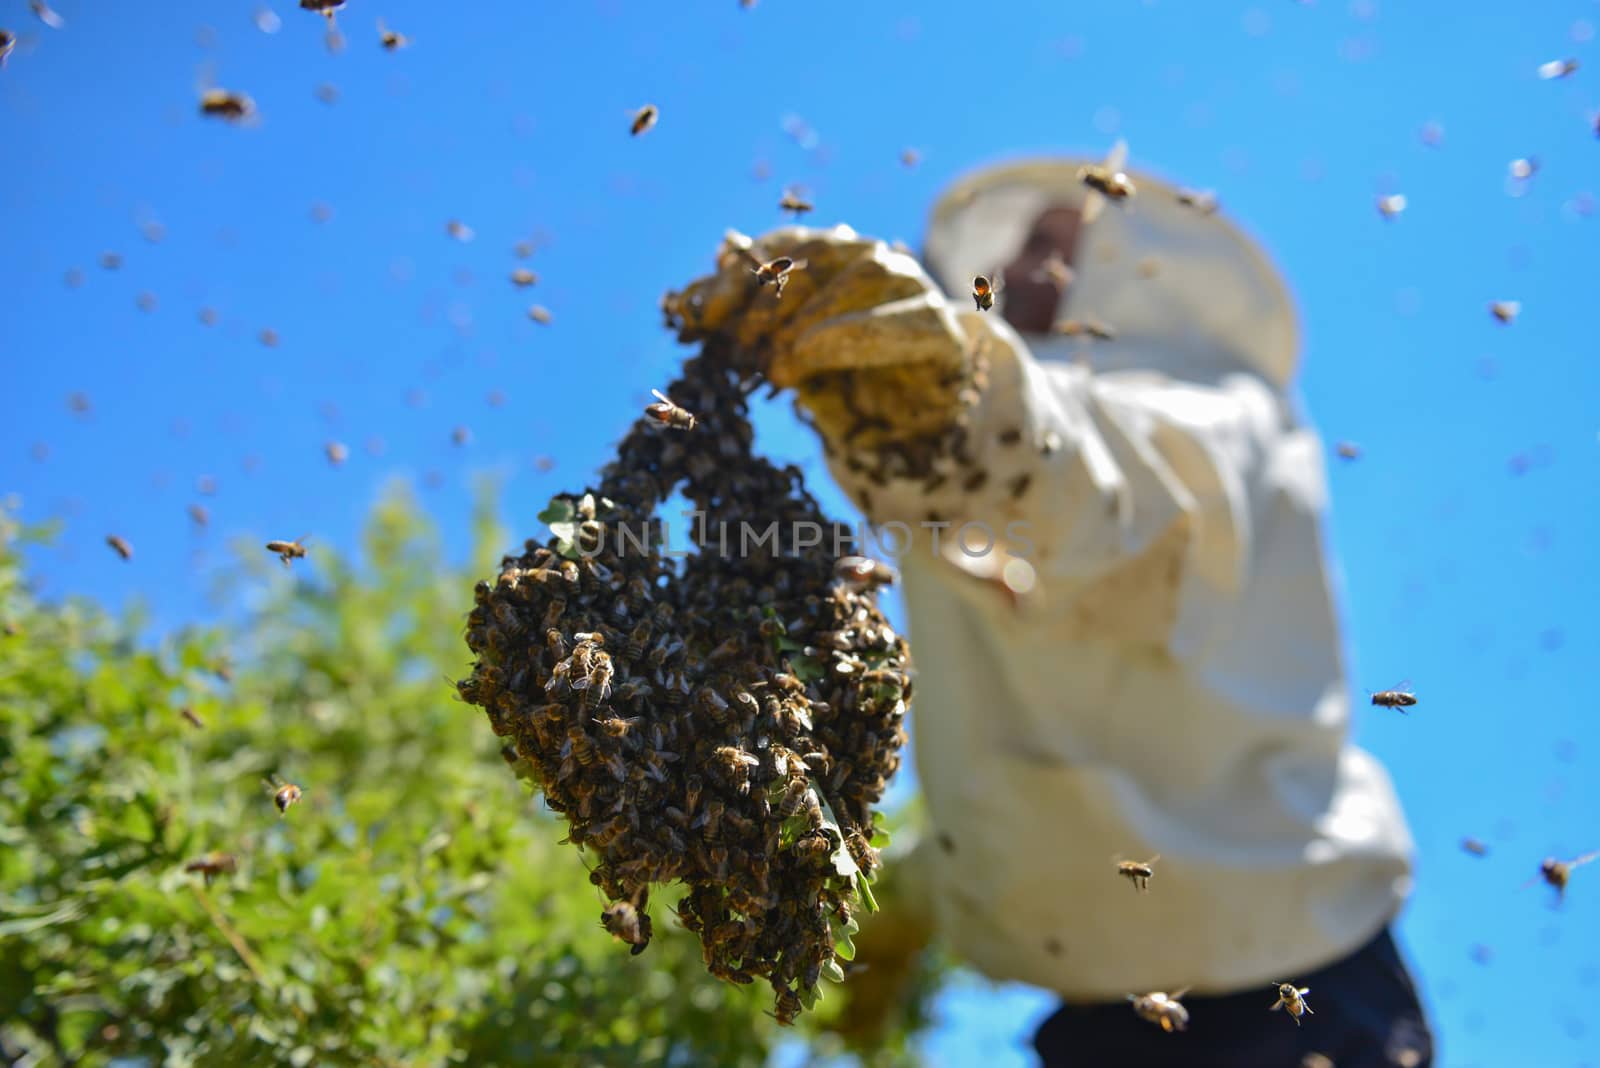 aggressive bees and the bee colony